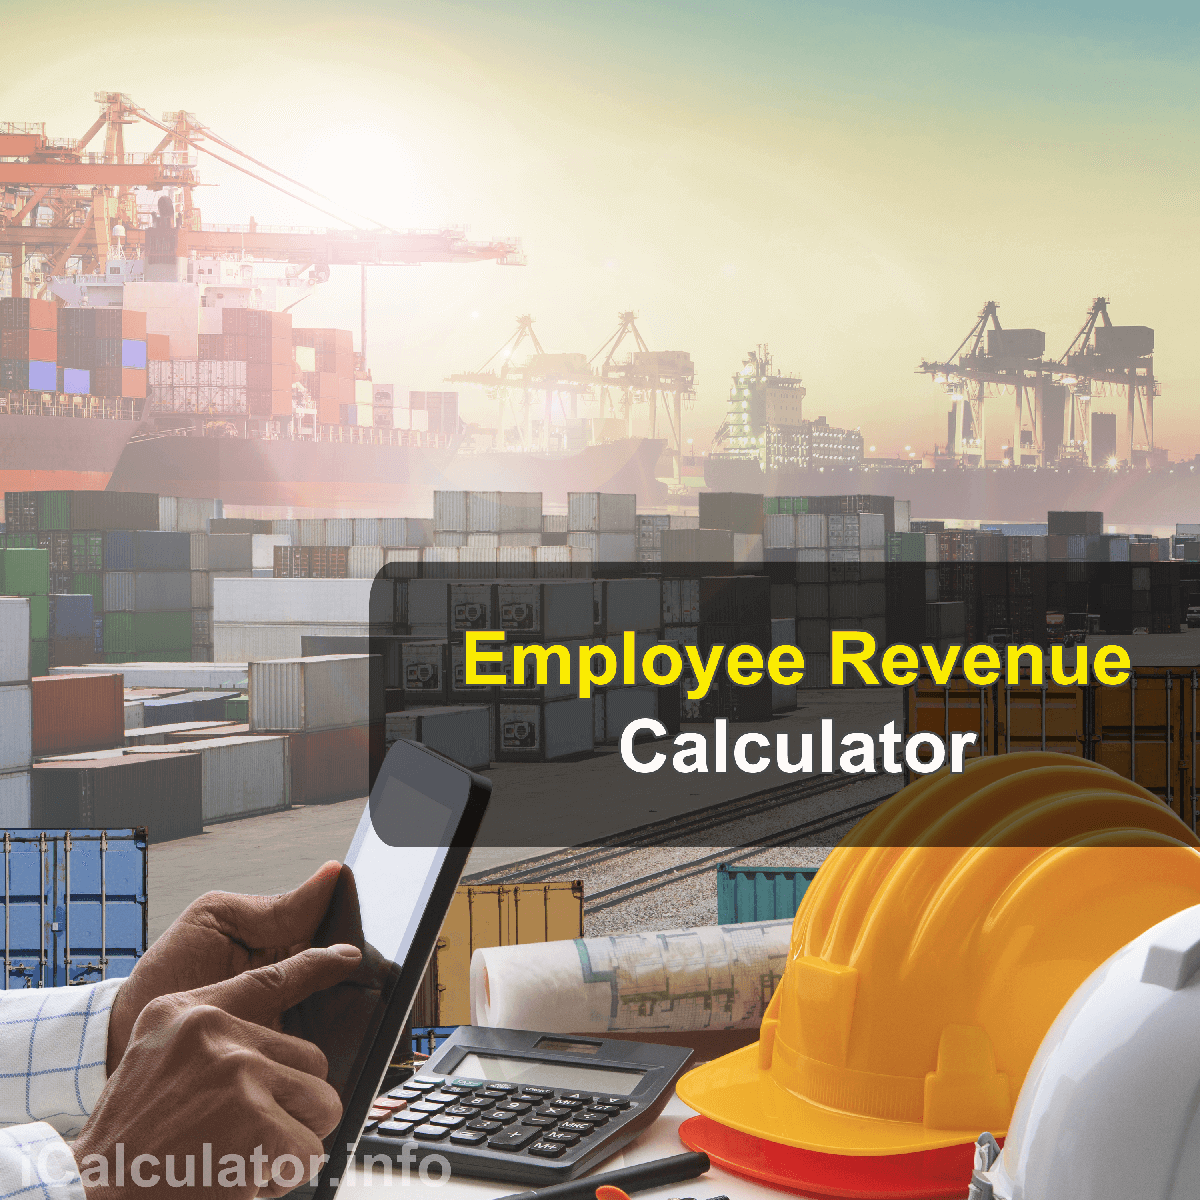 Revenue Per Employee Calculator. This image provides details of how to calculate the revenue per employee using a good calculator, a pen and notepad. By using the revenue per employee formula, the Revenue Per Employee Calculator provides a true calculation of how much each employee contributes to the profit and tunrover of a business as an even split per person contribution.